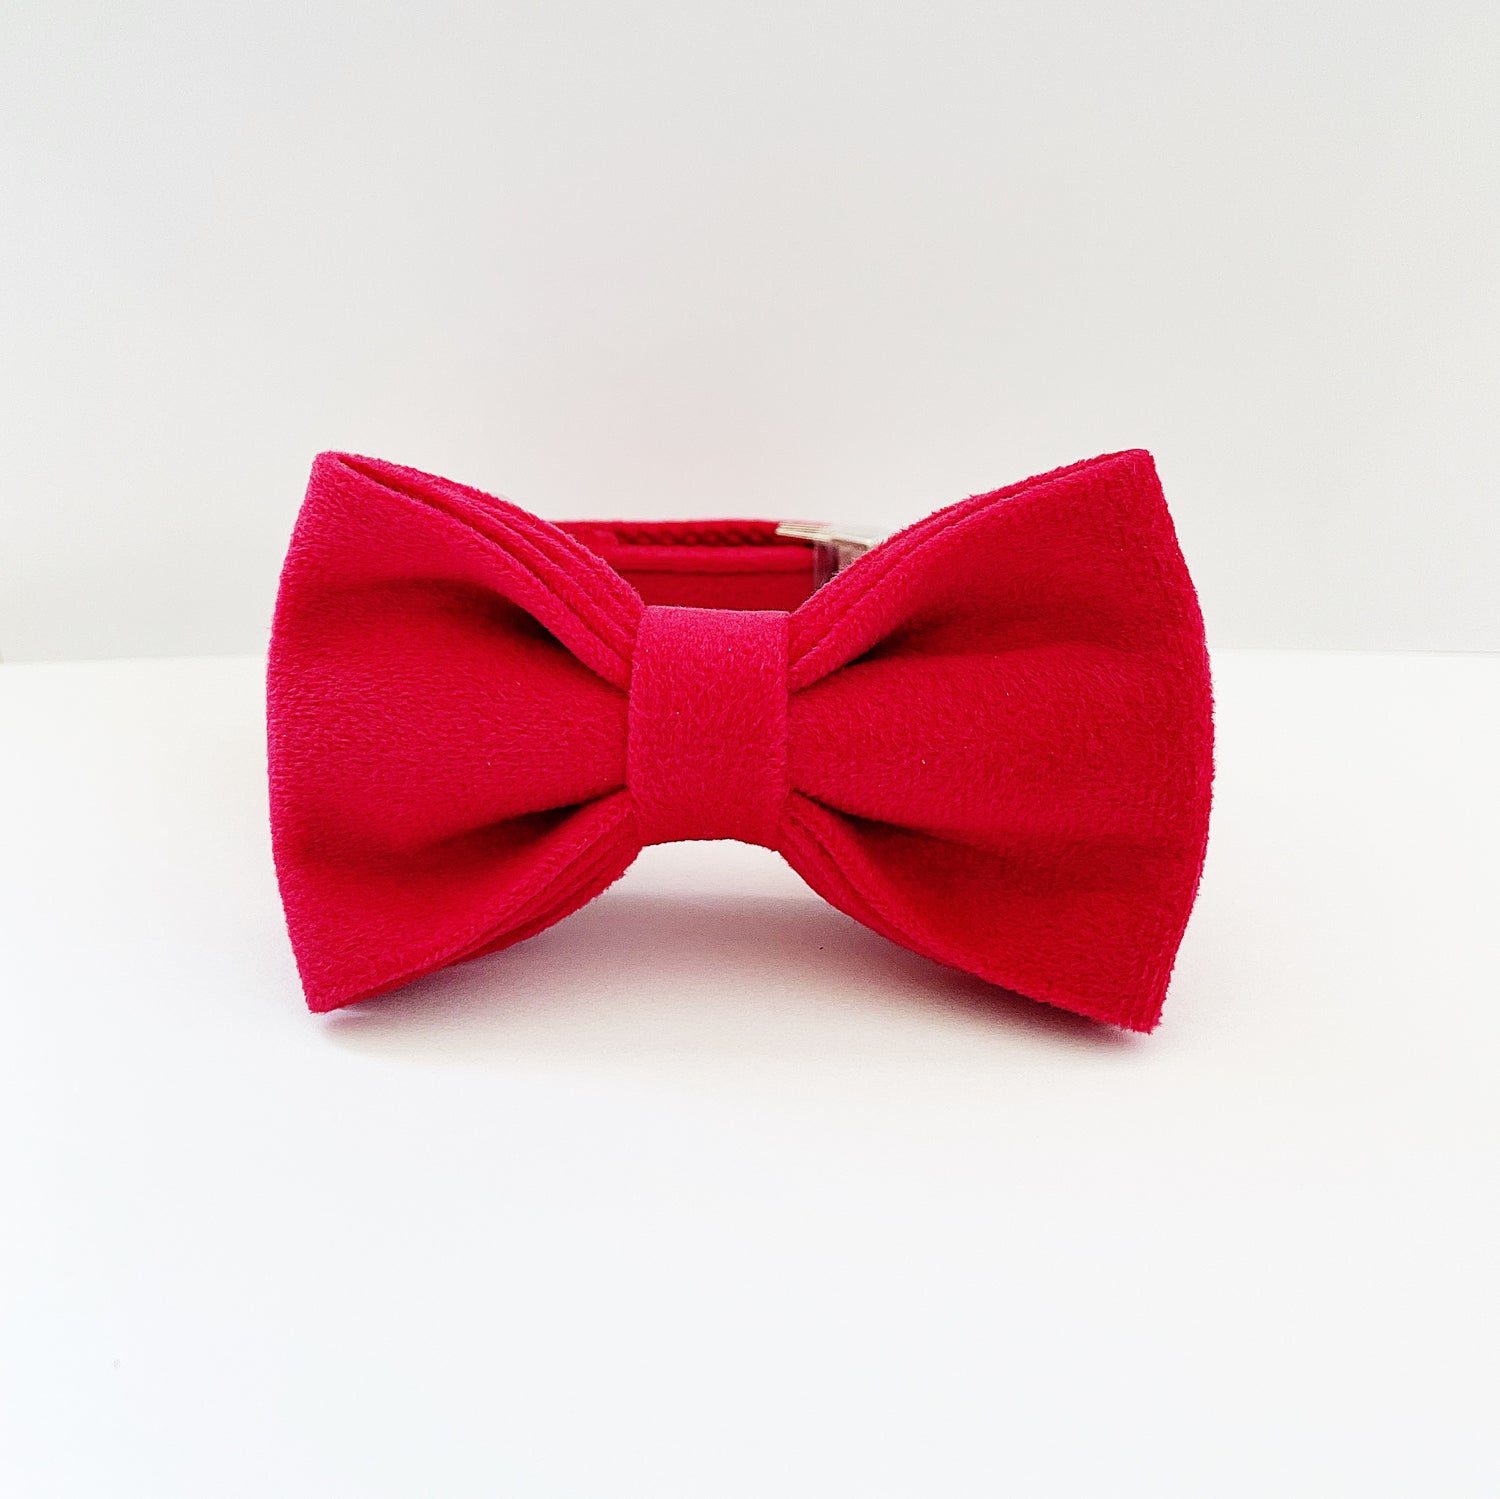 The Bow Tie Collars